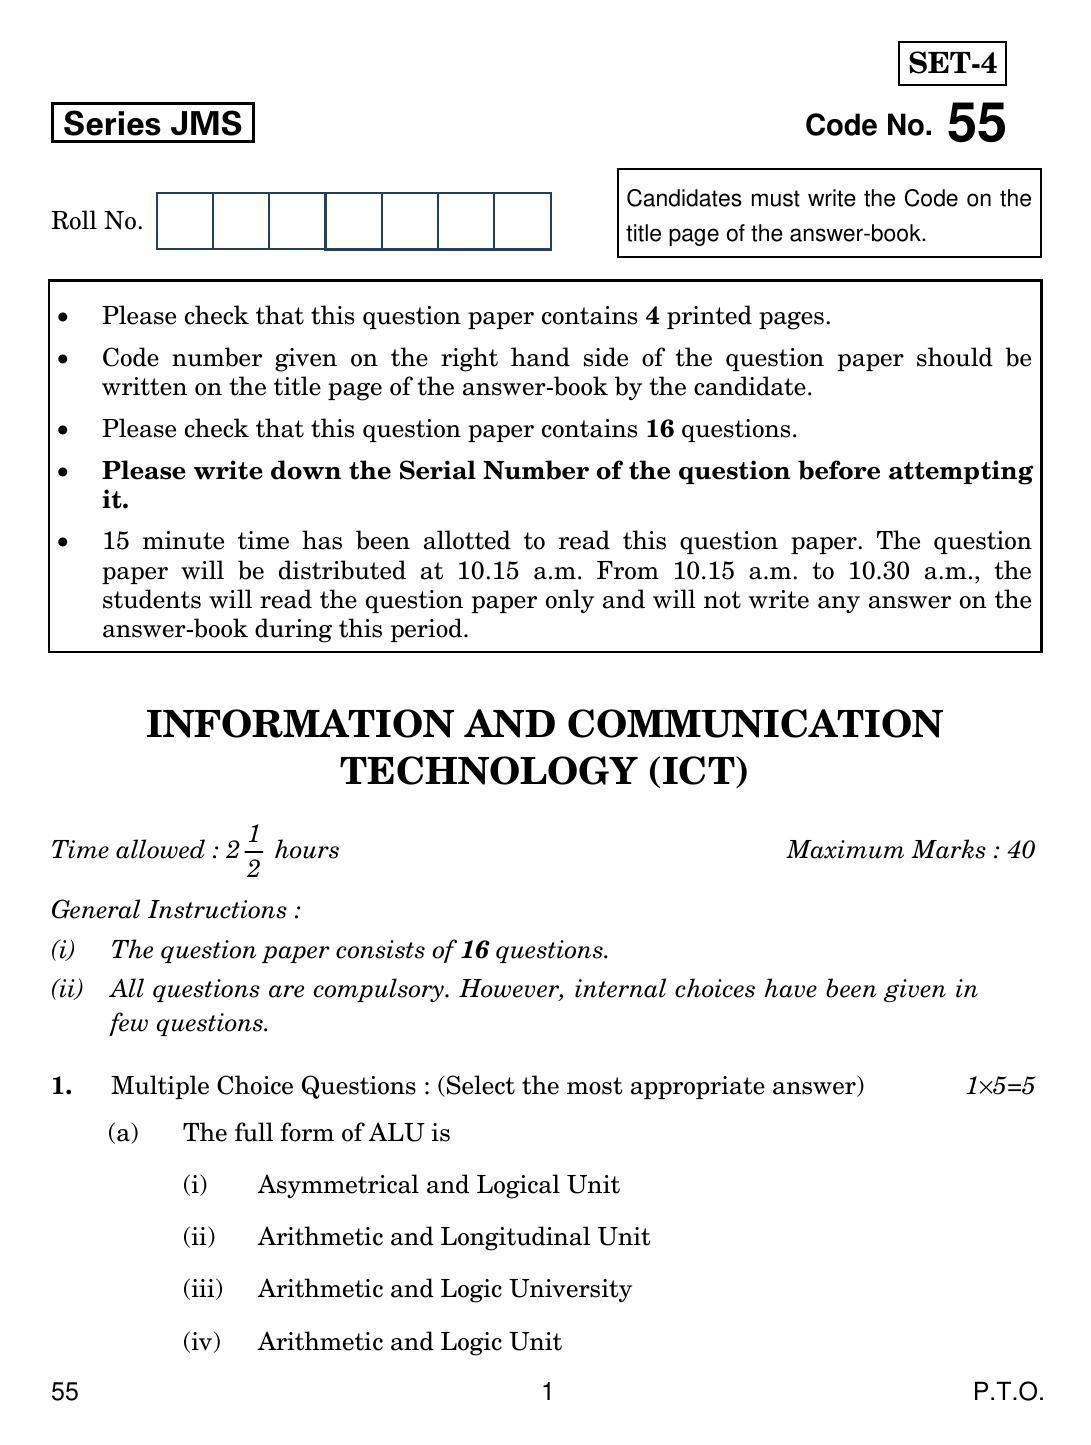 CBSE Class 10 55 INFORMATION AND COMMUNICATION TECHNOLOGY (ICT) 2019 Question Paper - Page 1